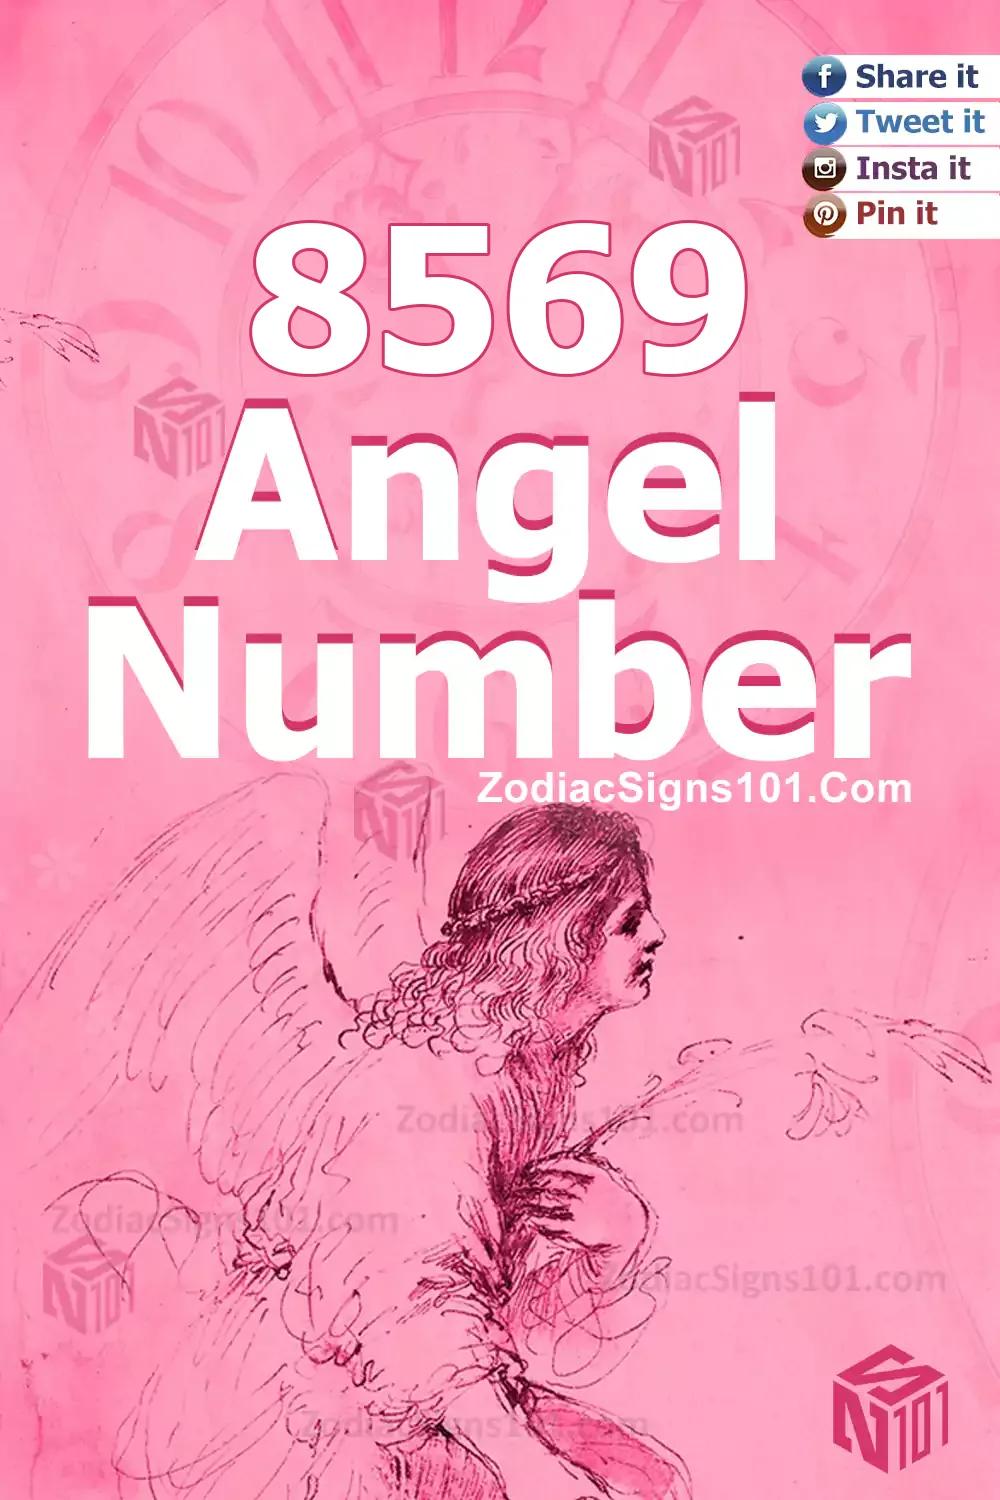 8569 Angel Number Meaning